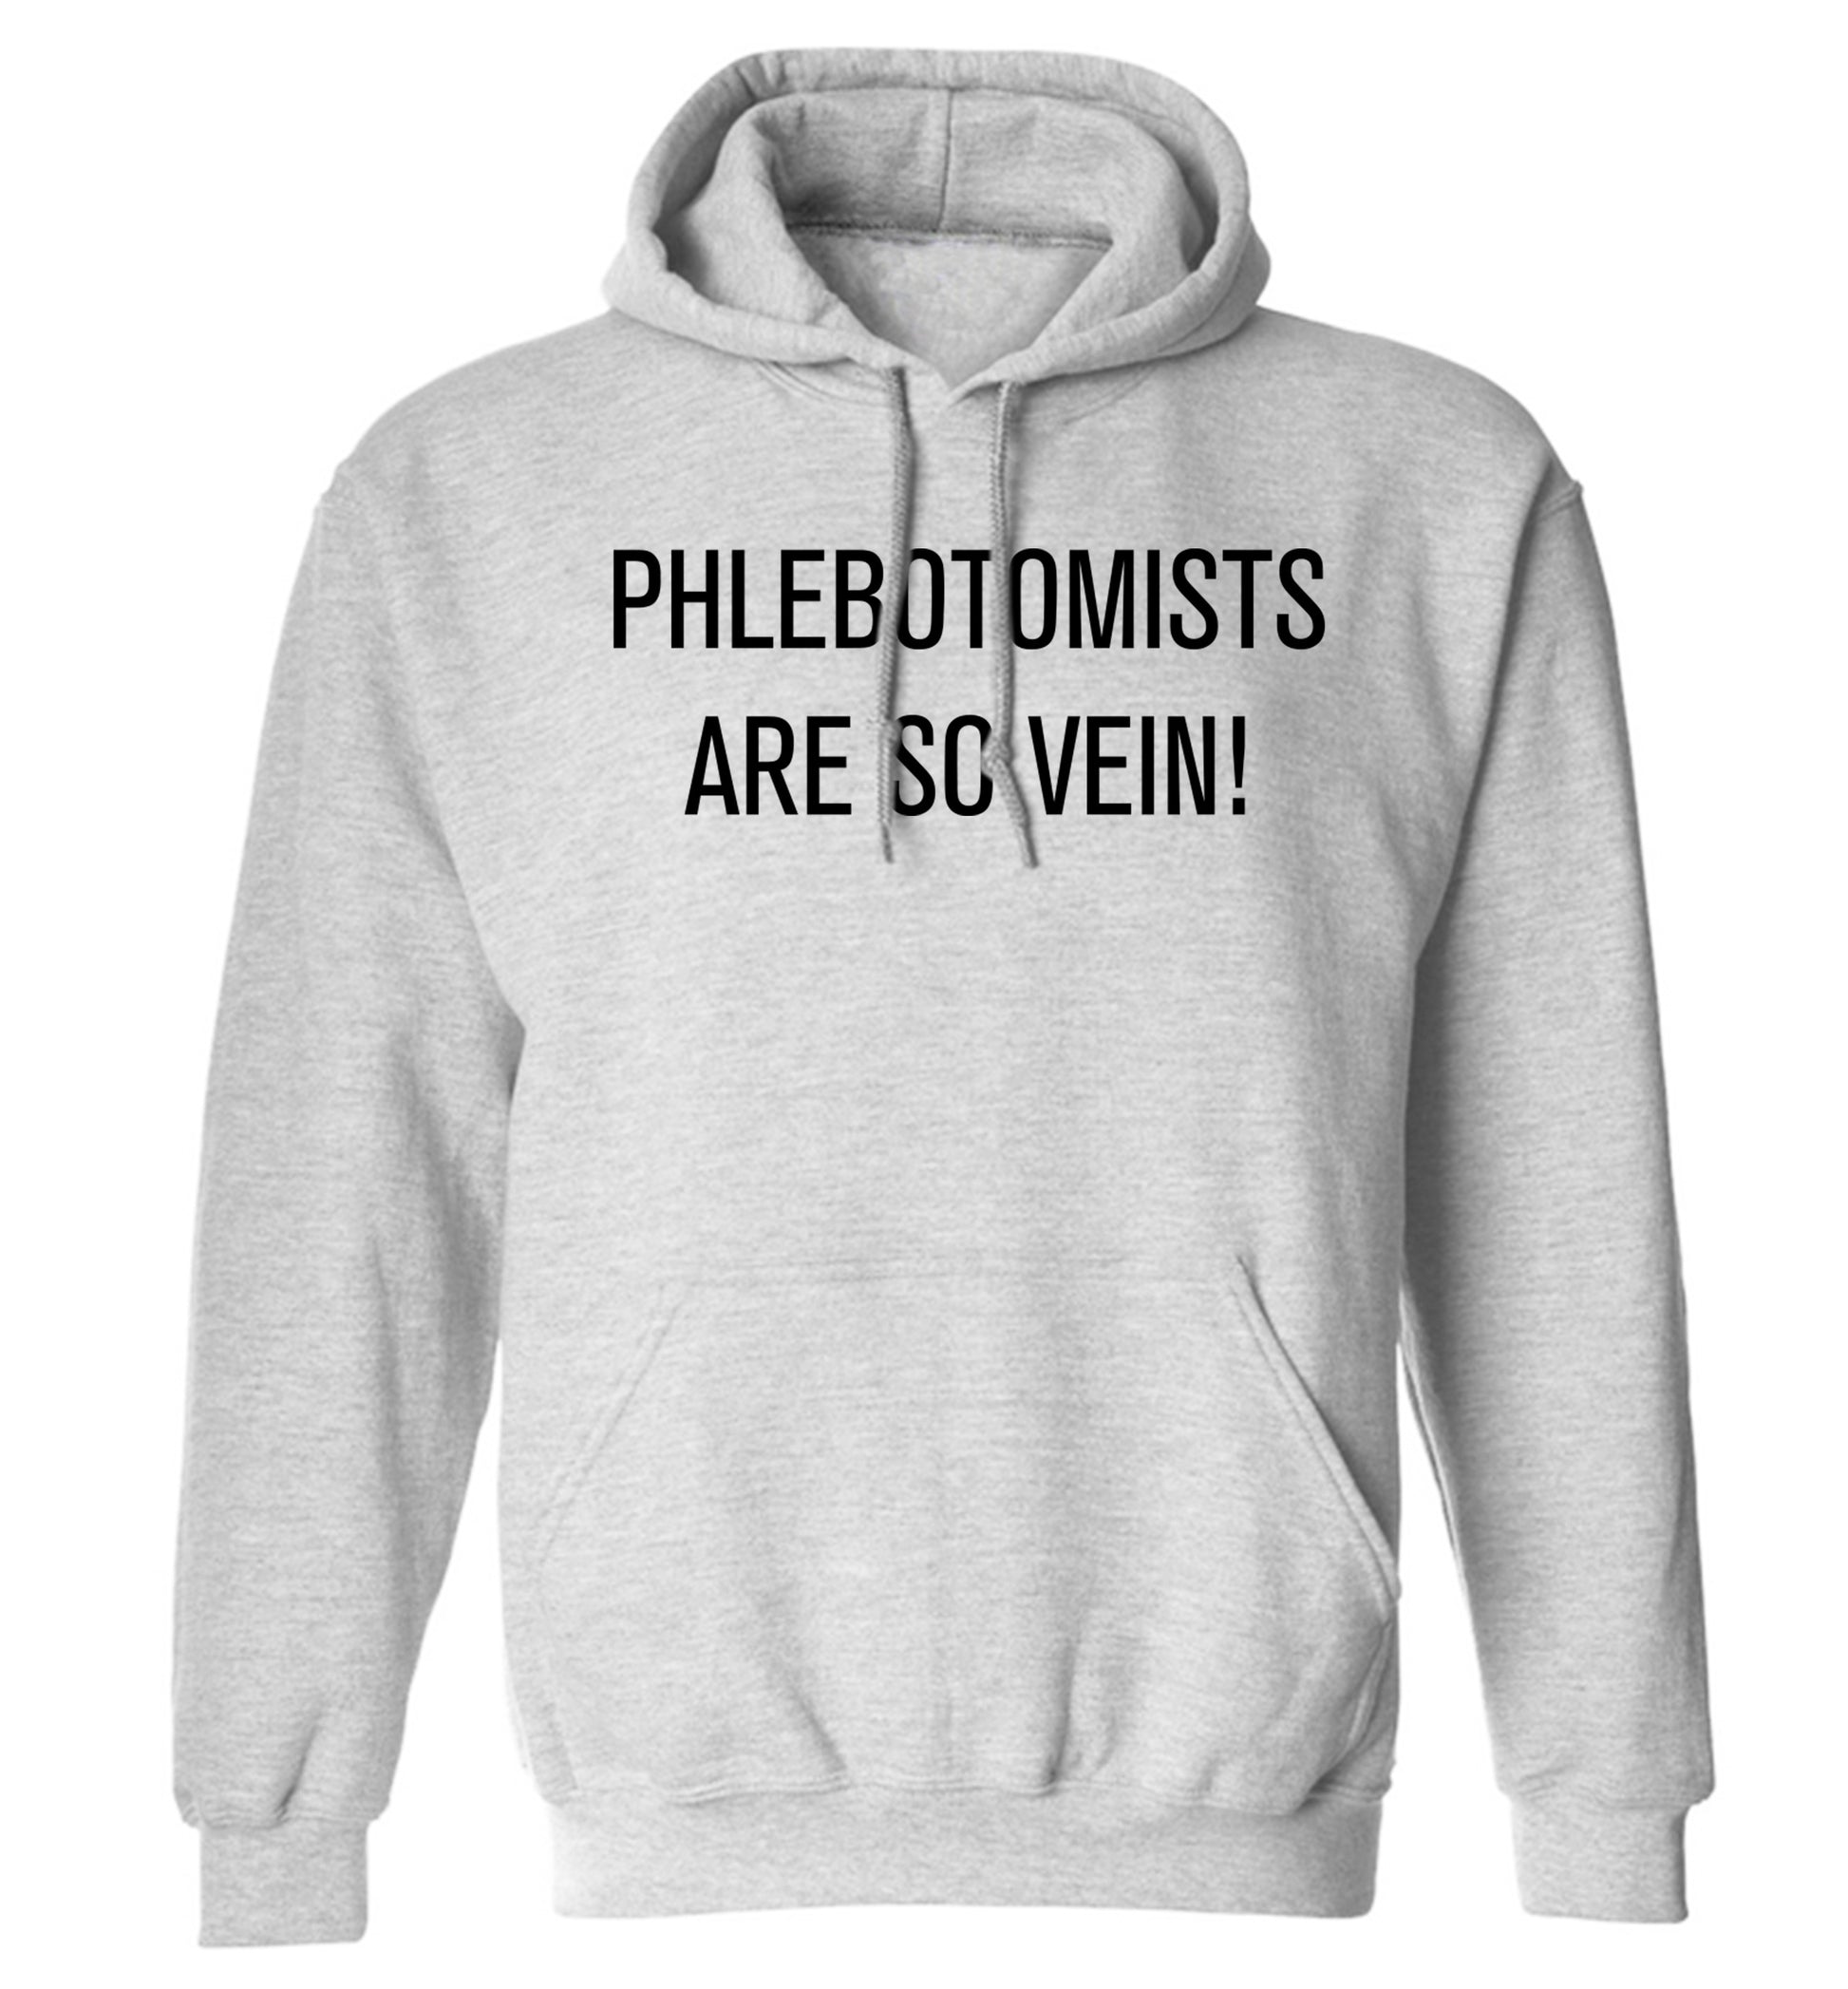 Phlebotomists are so vein! adults unisex grey hoodie 2XL